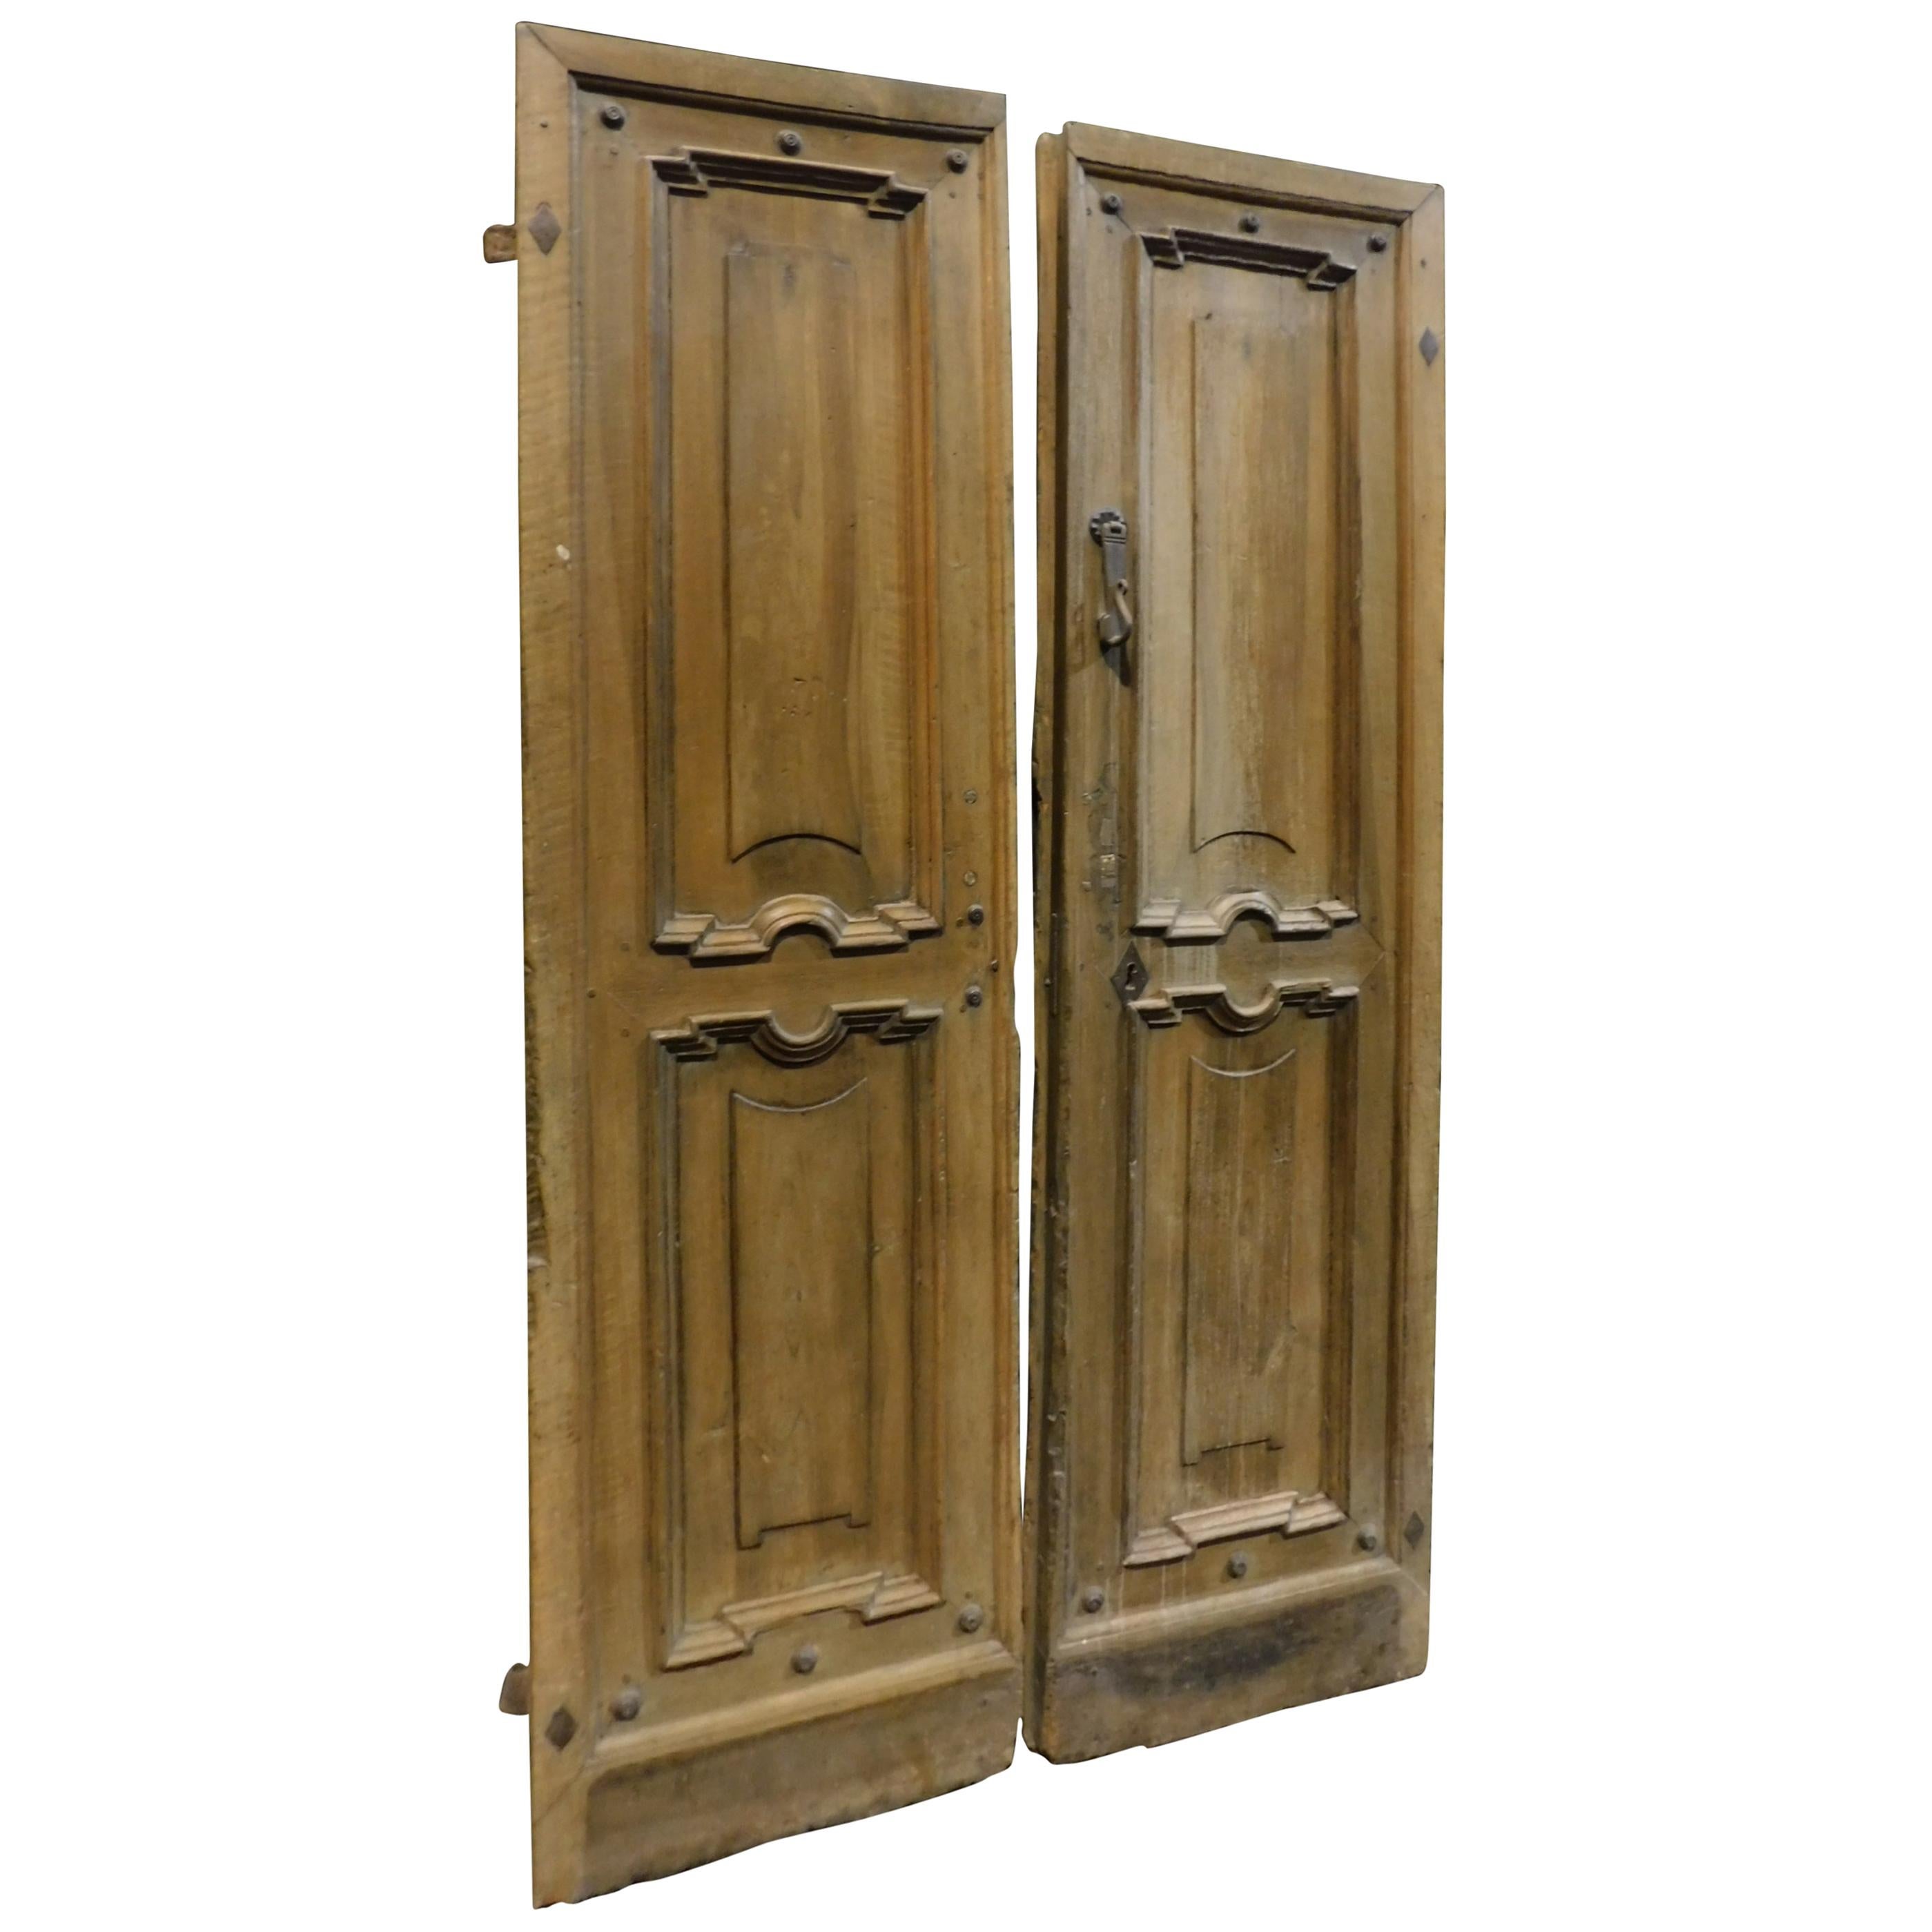 Antique Entrance Door with Double Leaf, Carved Walnut Wood, 1800, Italy